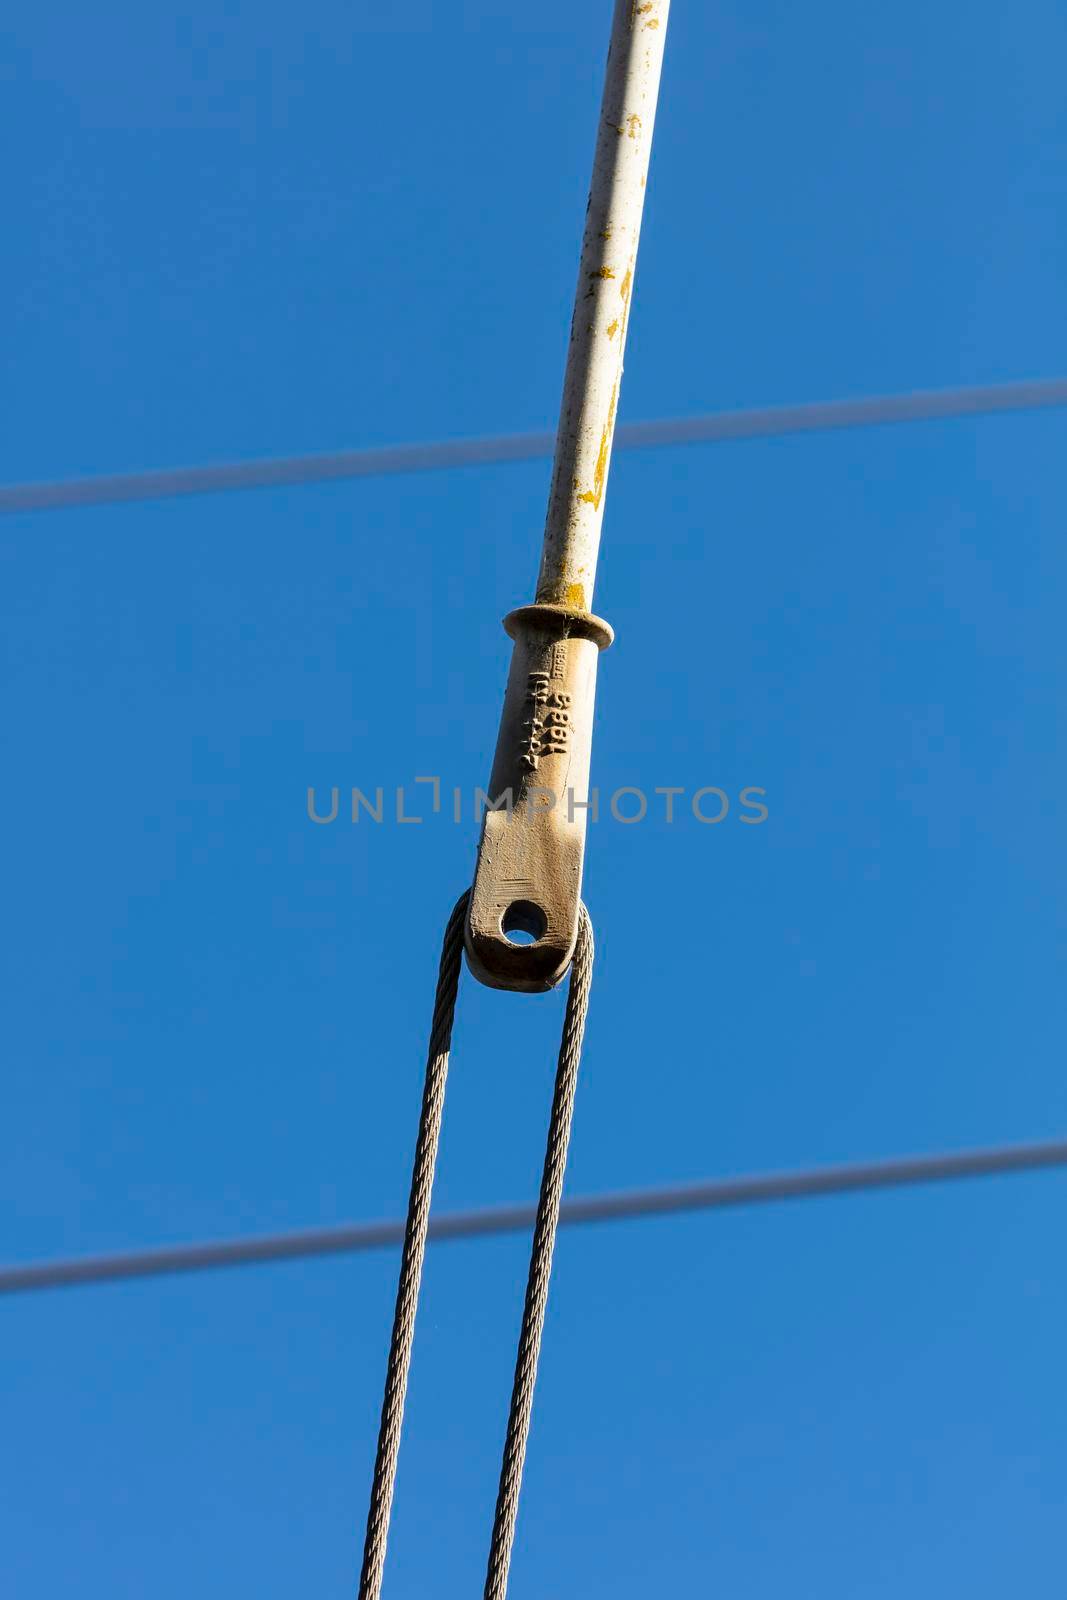 Photograph of a tensioner bracket on a transmission line